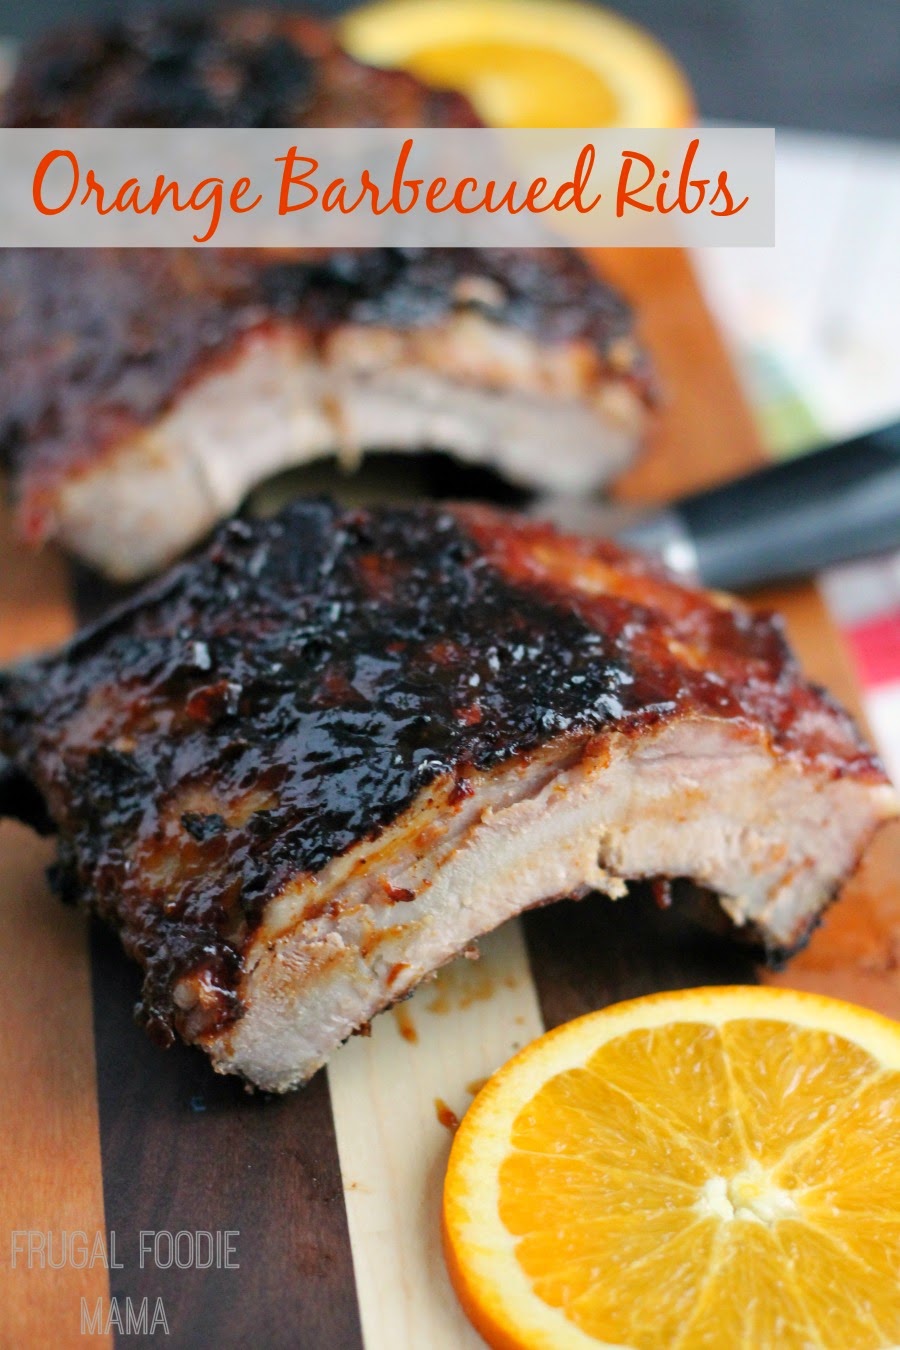 These tender Orange Barbecued Ribs are made sweet & spicy with fresh orange juice, zest, red pepper, & bold Kraft barbecue sauce. #Evergriller #sponsored